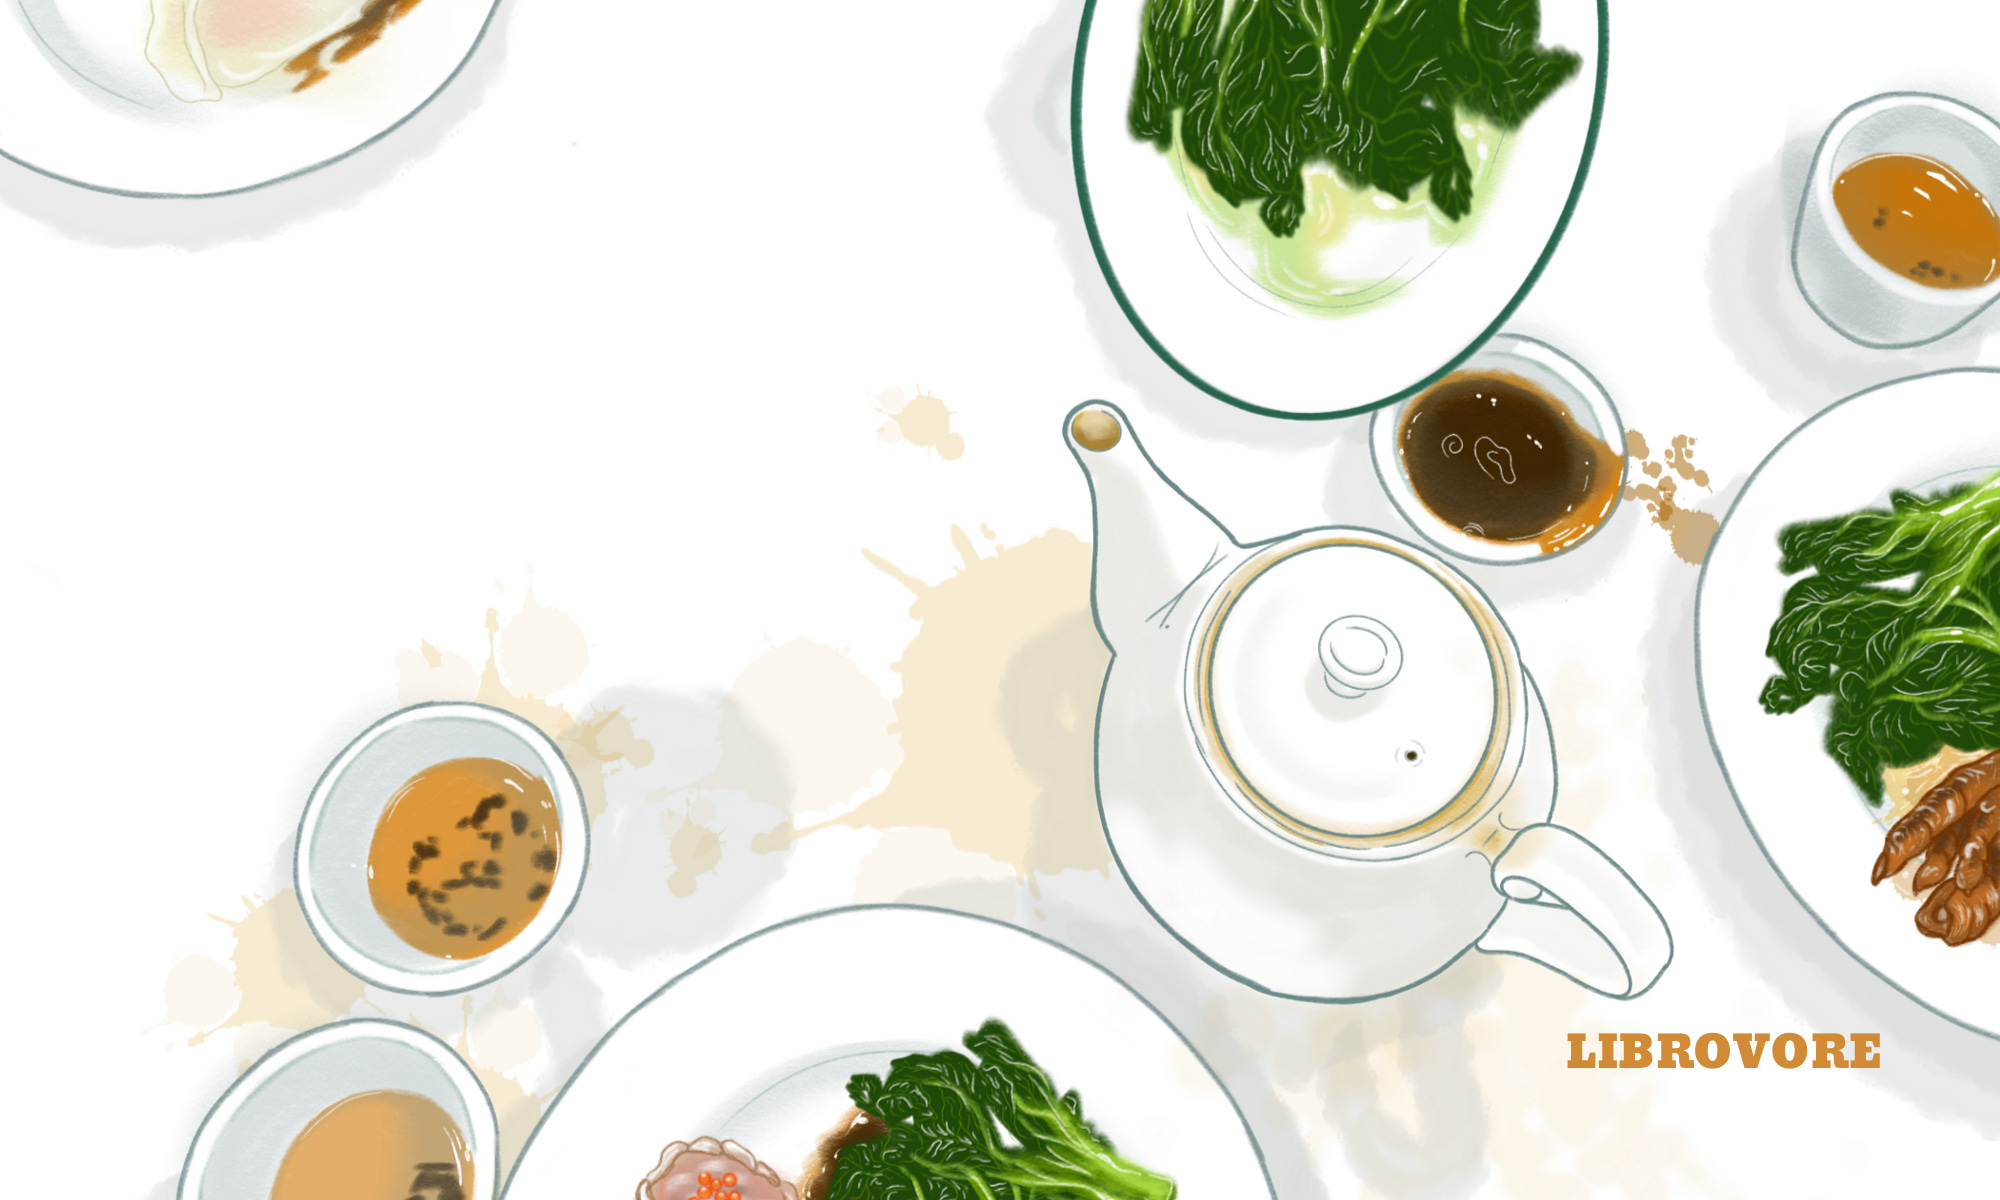 illustration of dim sum plates, tea cups, and a white ceramic tea pot; tea stains on white table